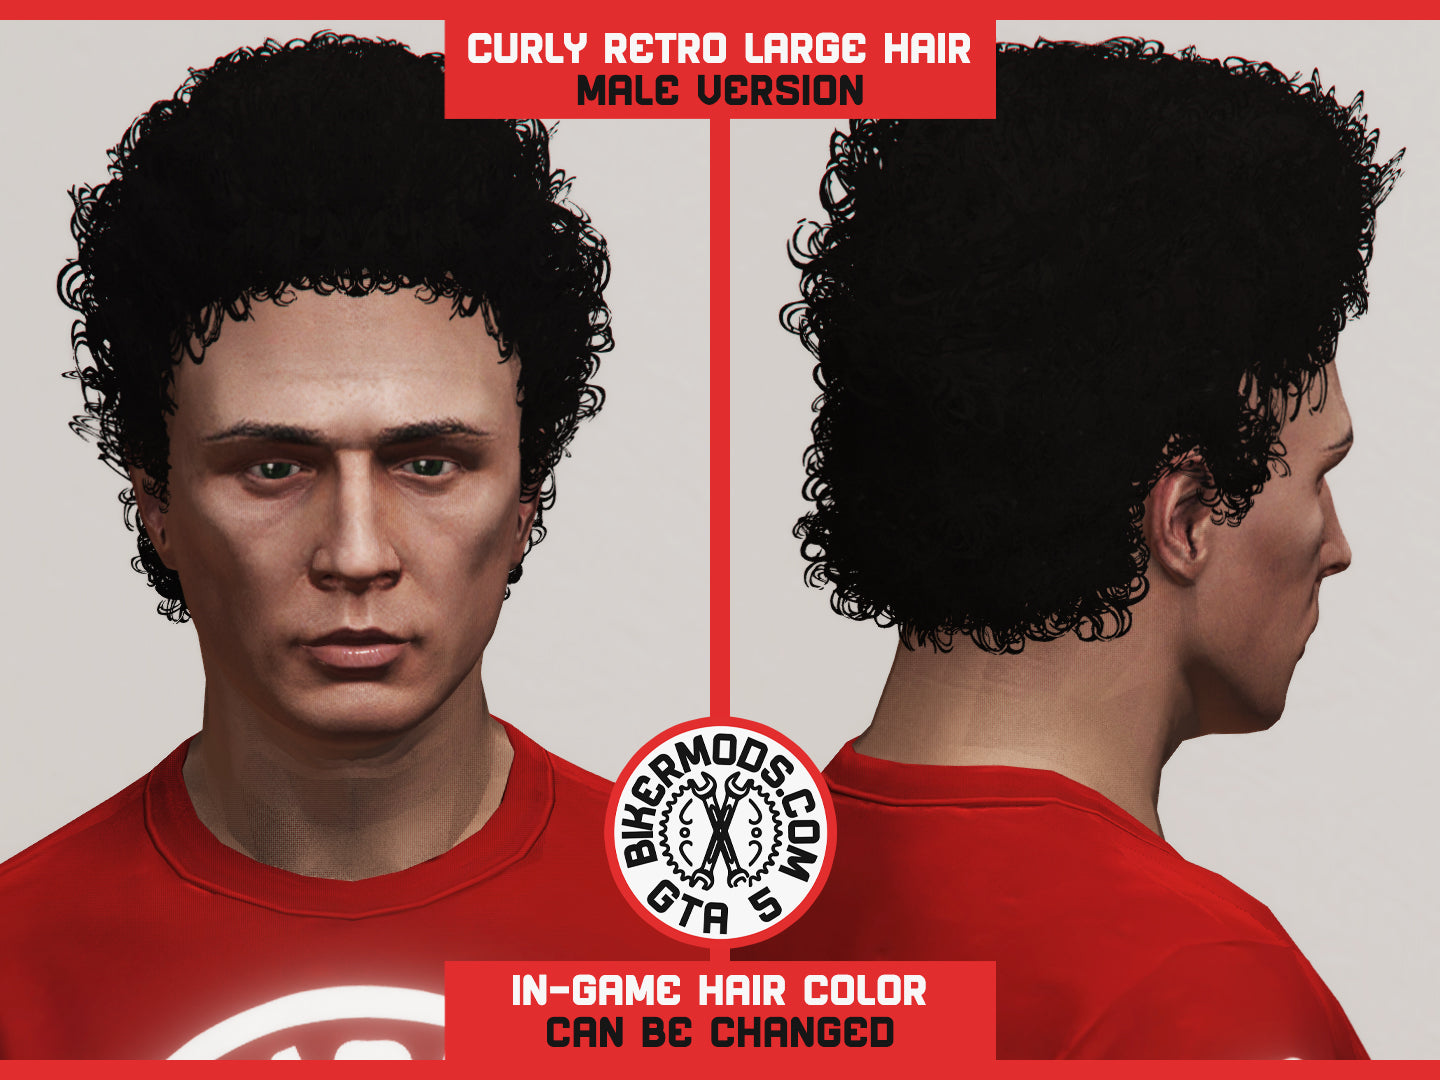 Curly Retro Large Afro Hair